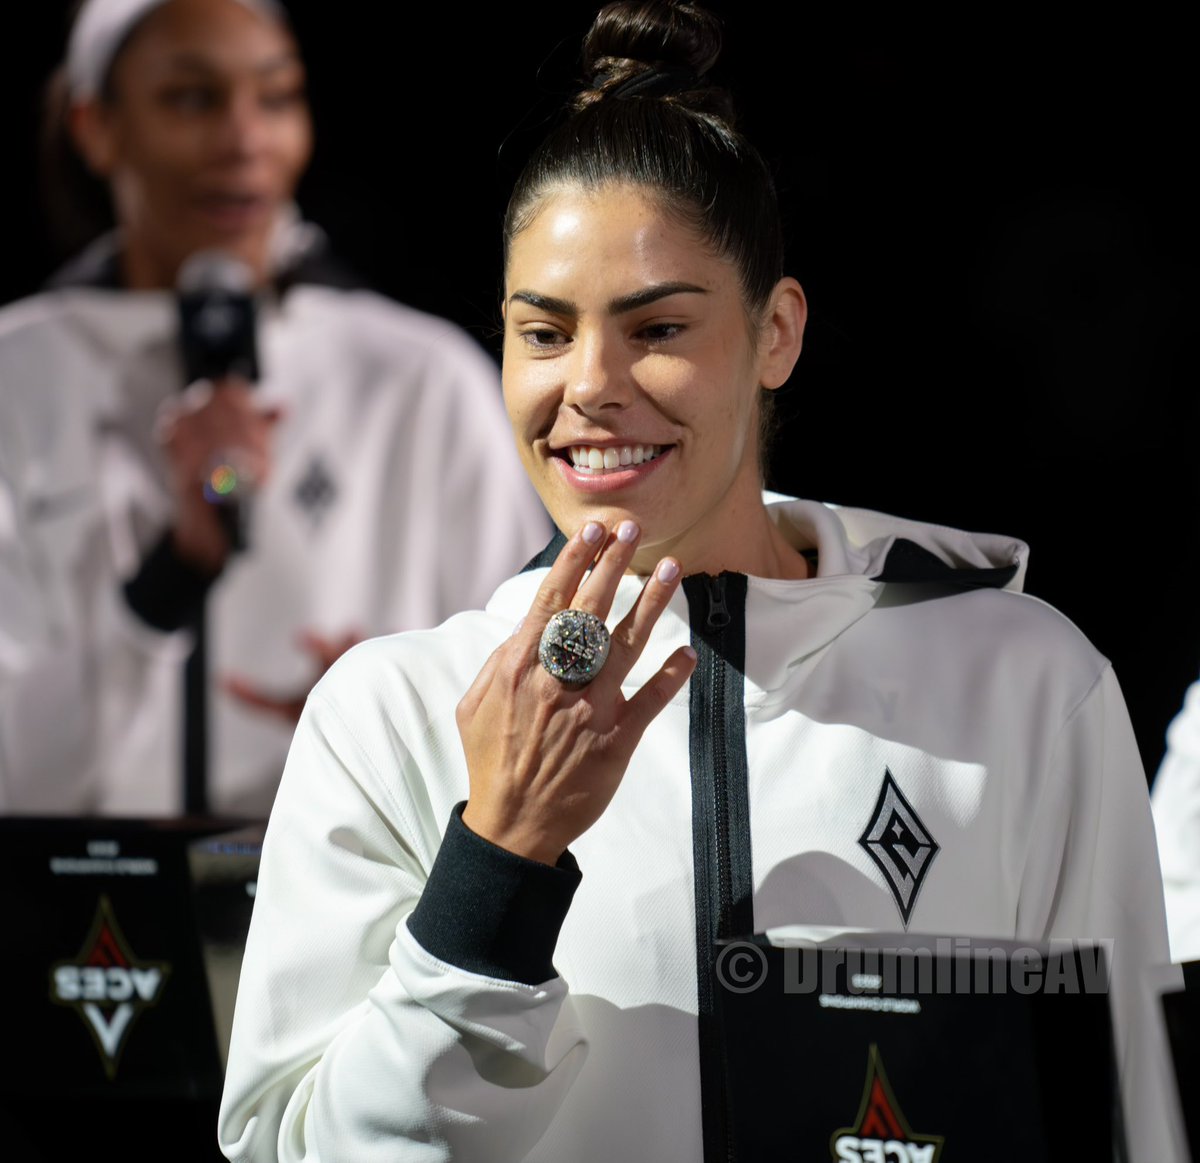 Views, from last nights Home and Season Opener as the @LVAces took down the @PhoenixMercury 89-80 on a night where another banner was raised. 📸: Evan Guerra of @DrumlineAV & @Str8BetSports #ALLINLV #WNBA